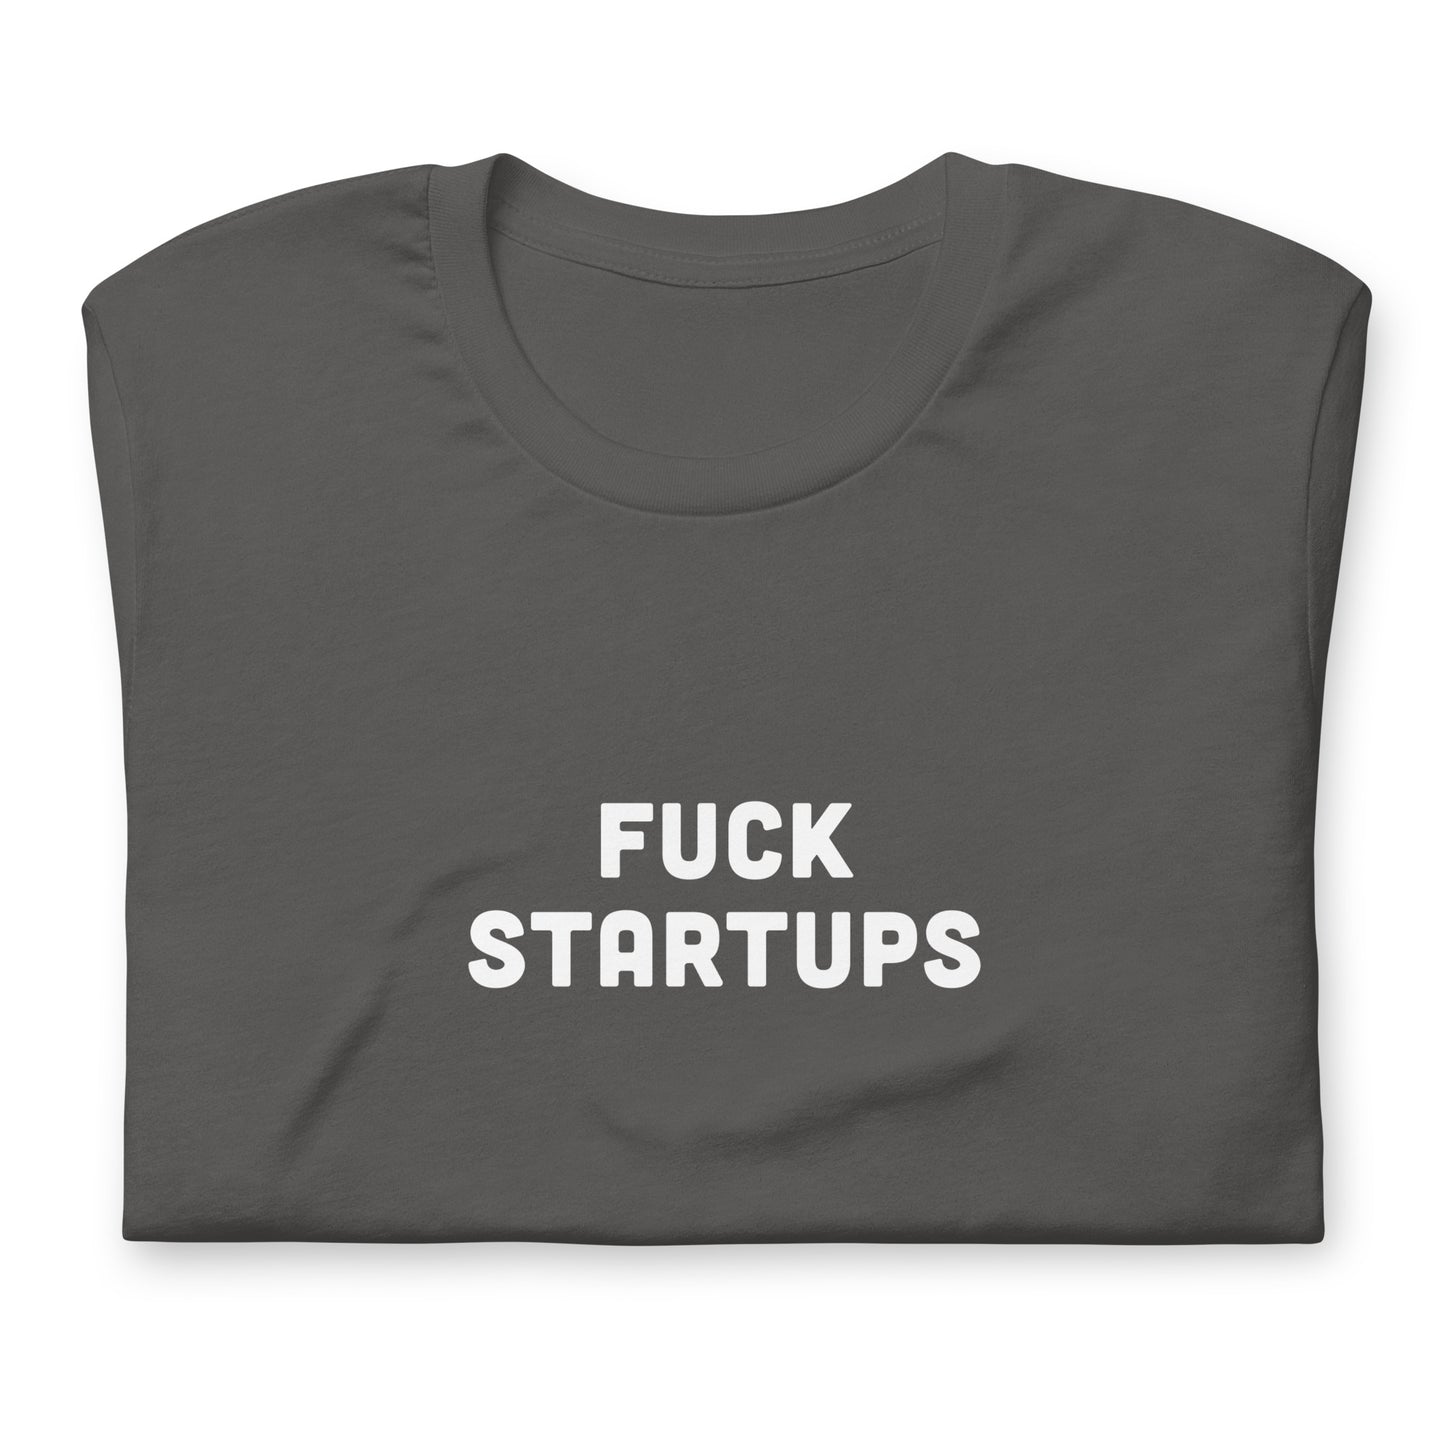 Fuck Startups T-Shirt Size S Color Navy